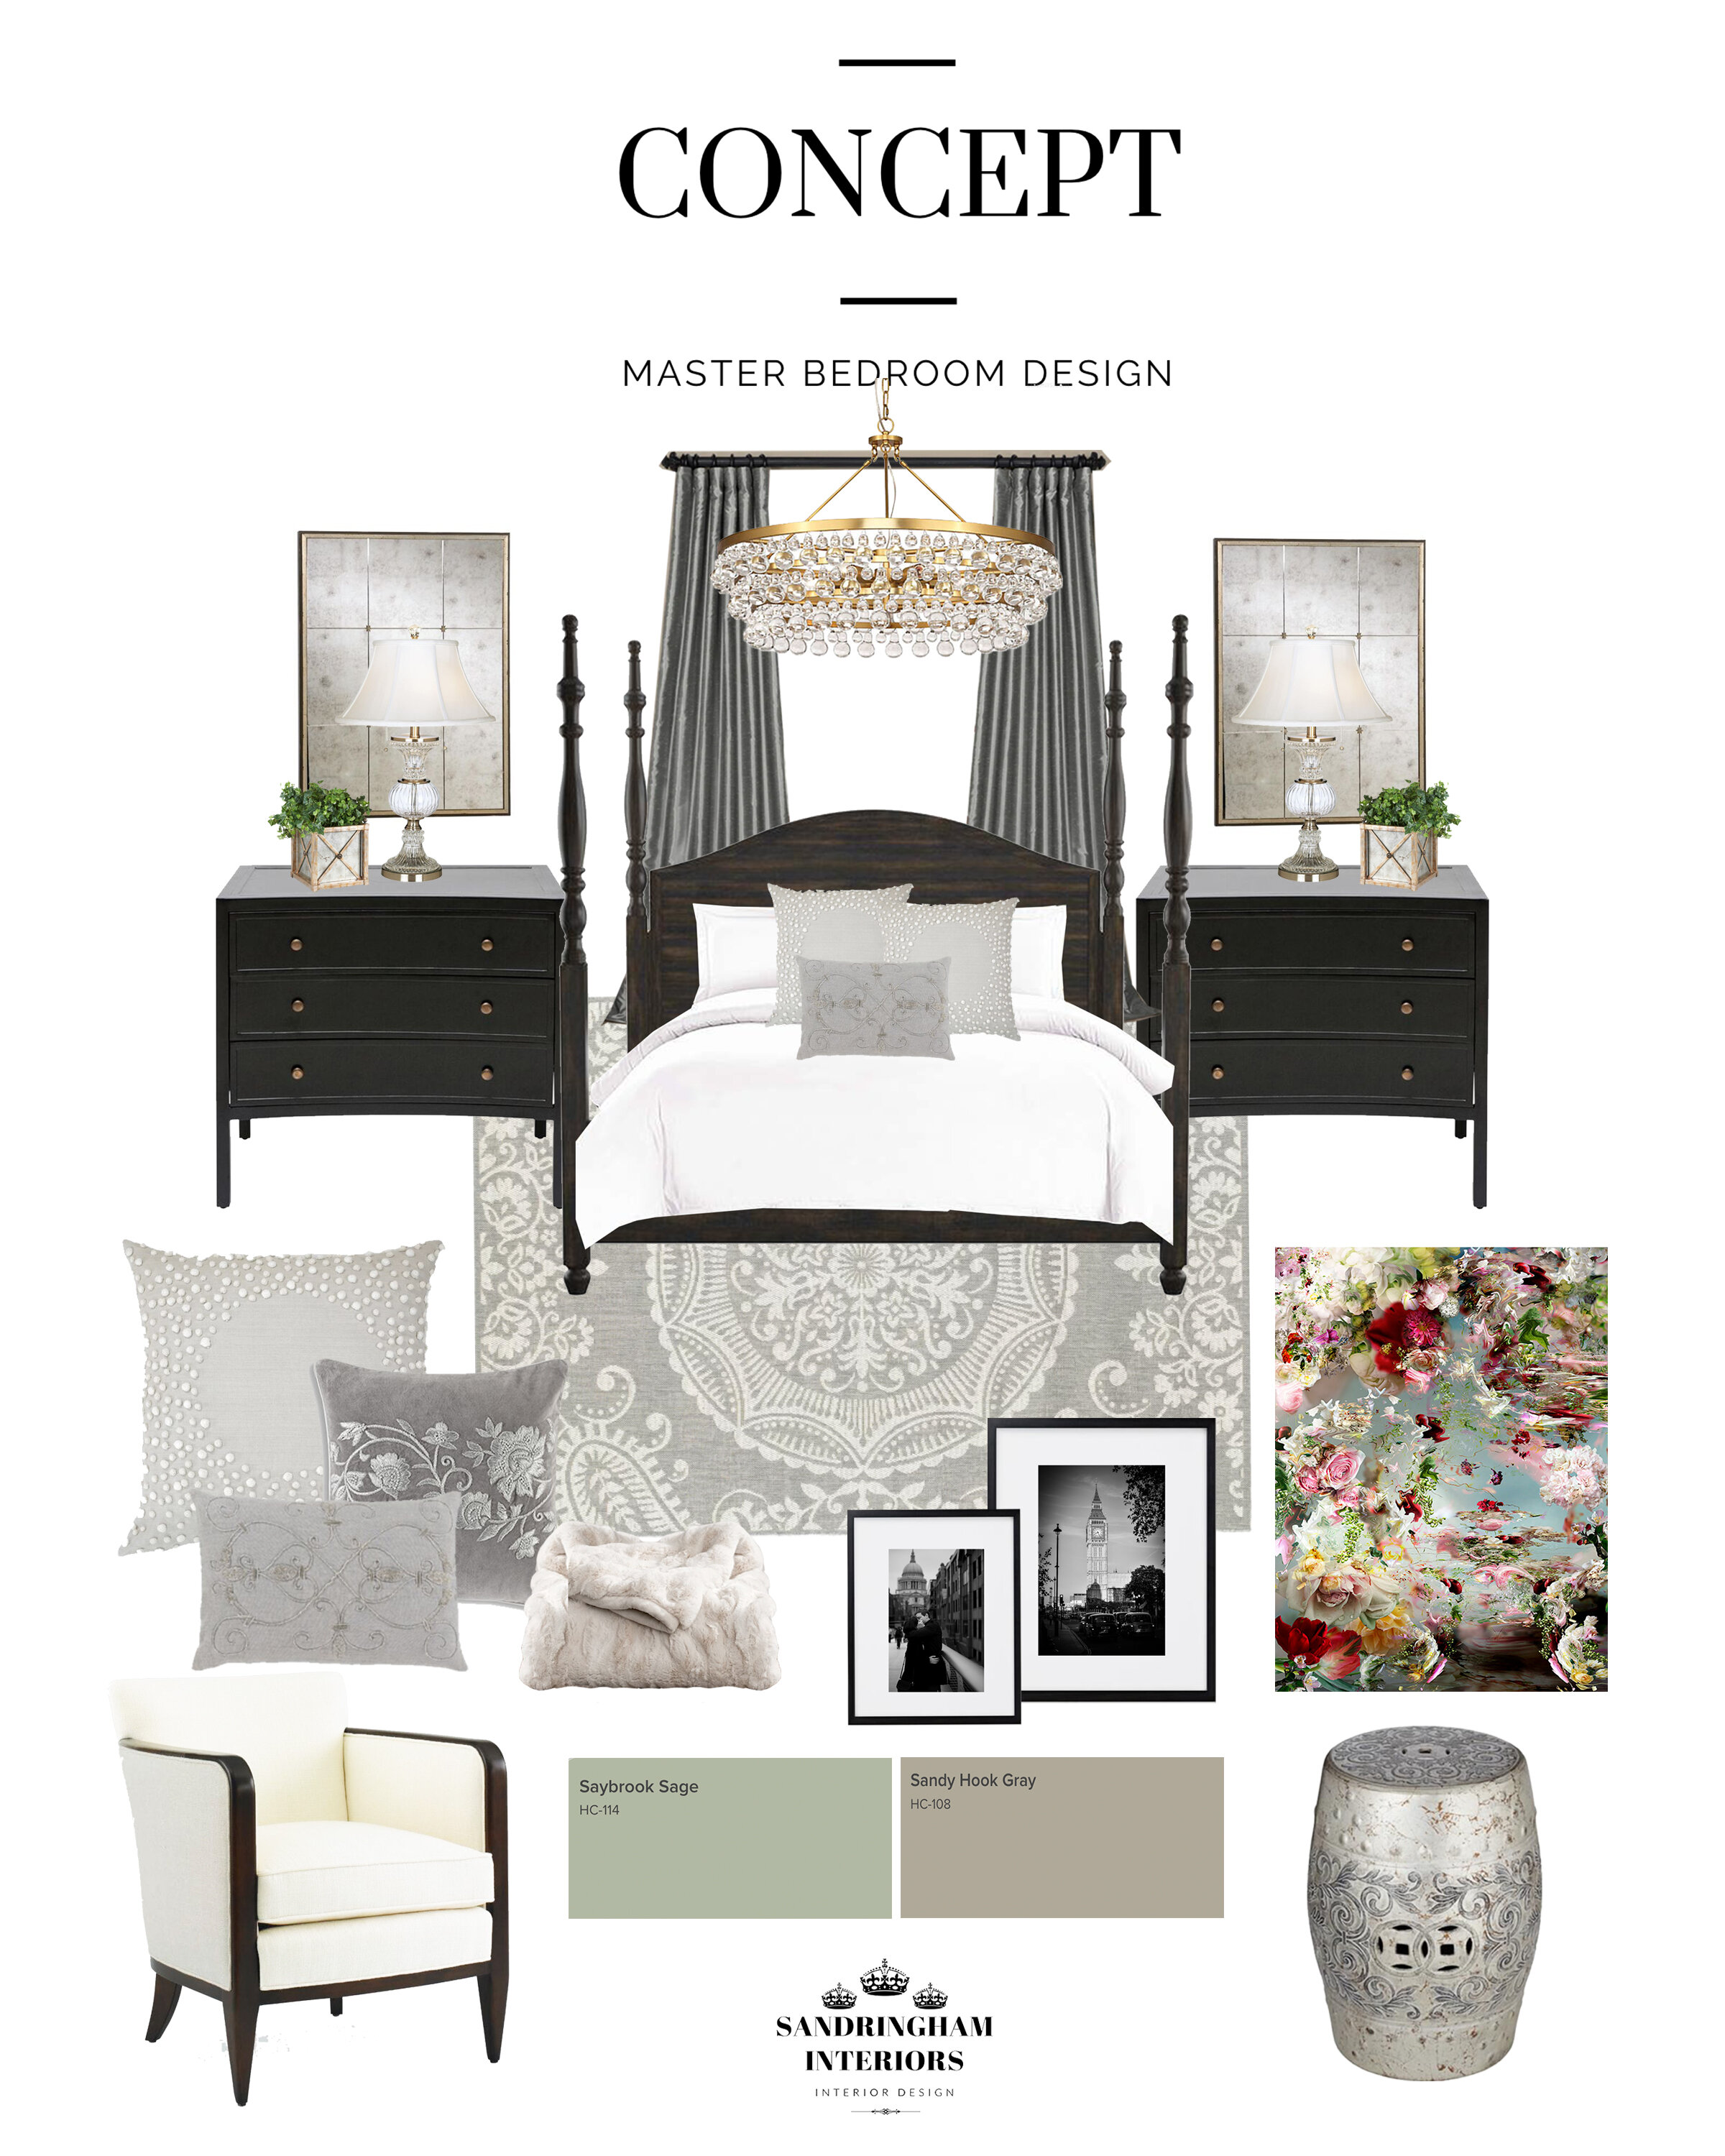 Designing from Home the E-Design Way...! — Sandringham Interiors